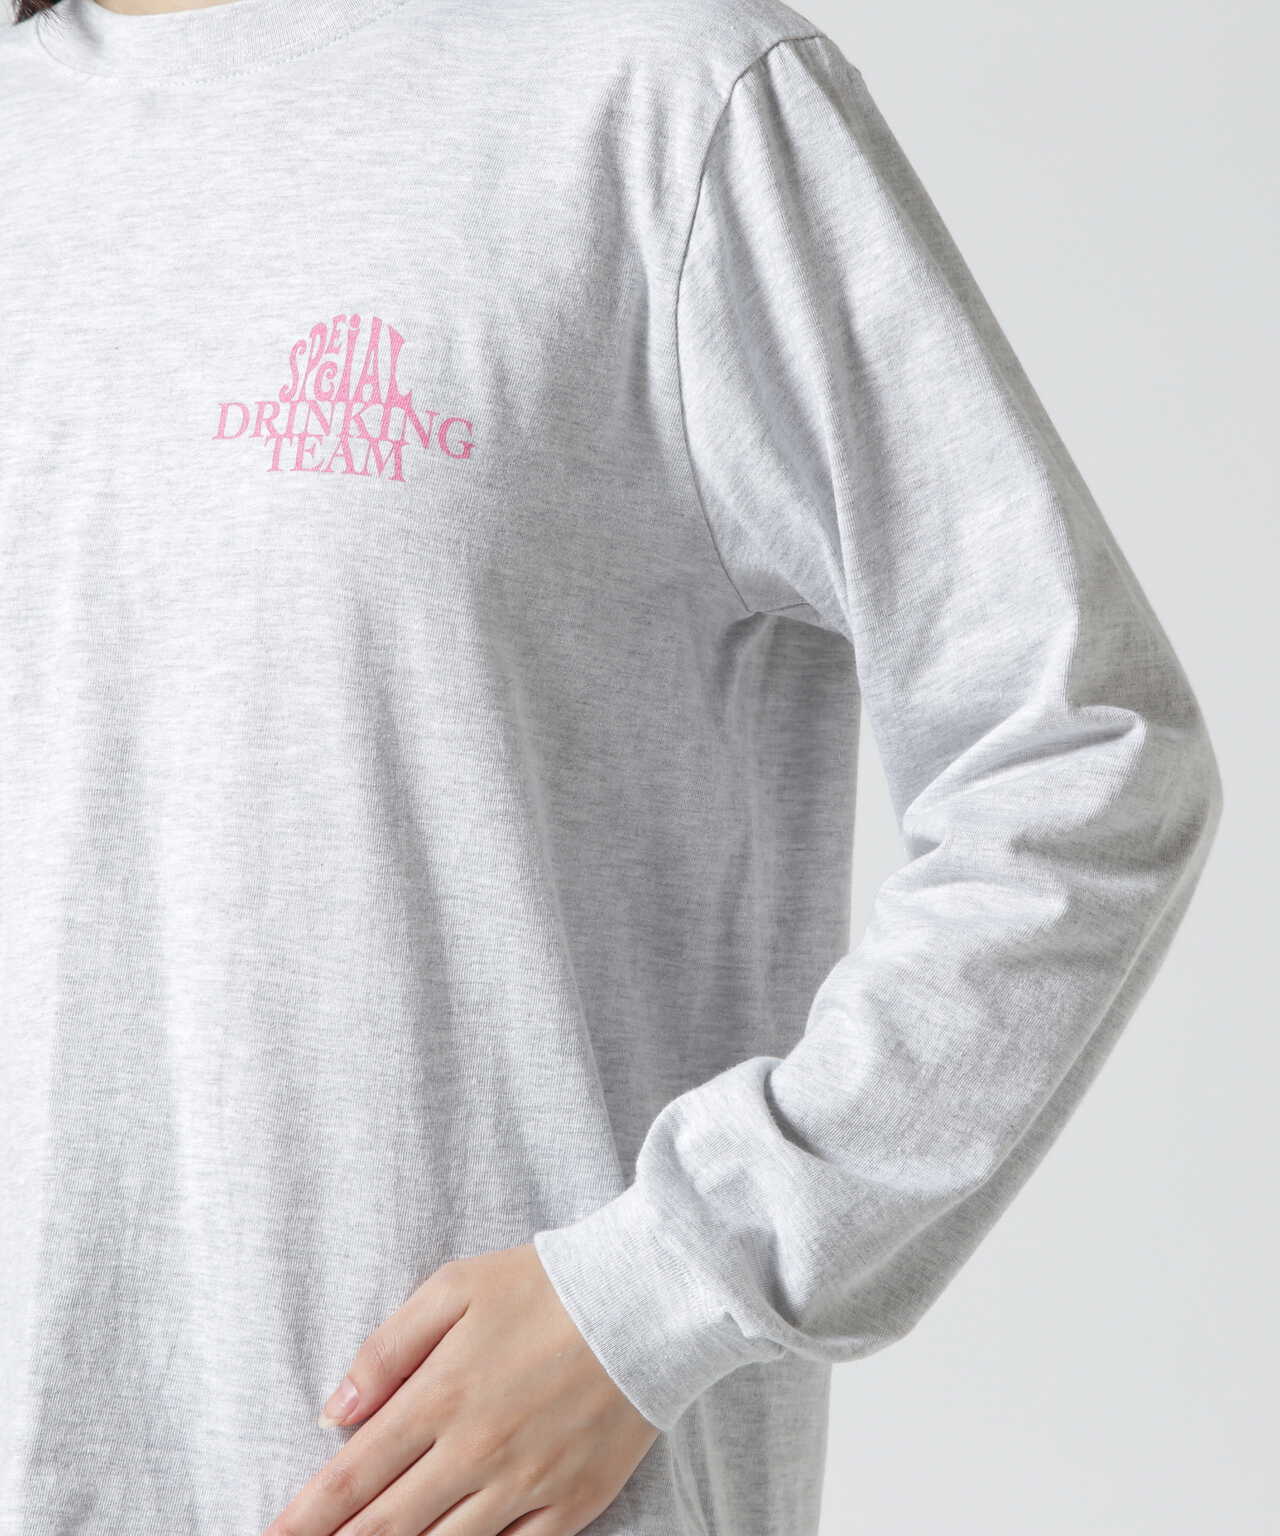 THE DAY ON THE BEACH/ザデイオンザビーチ　CUT OFF L/S SPECIAL DRINKING